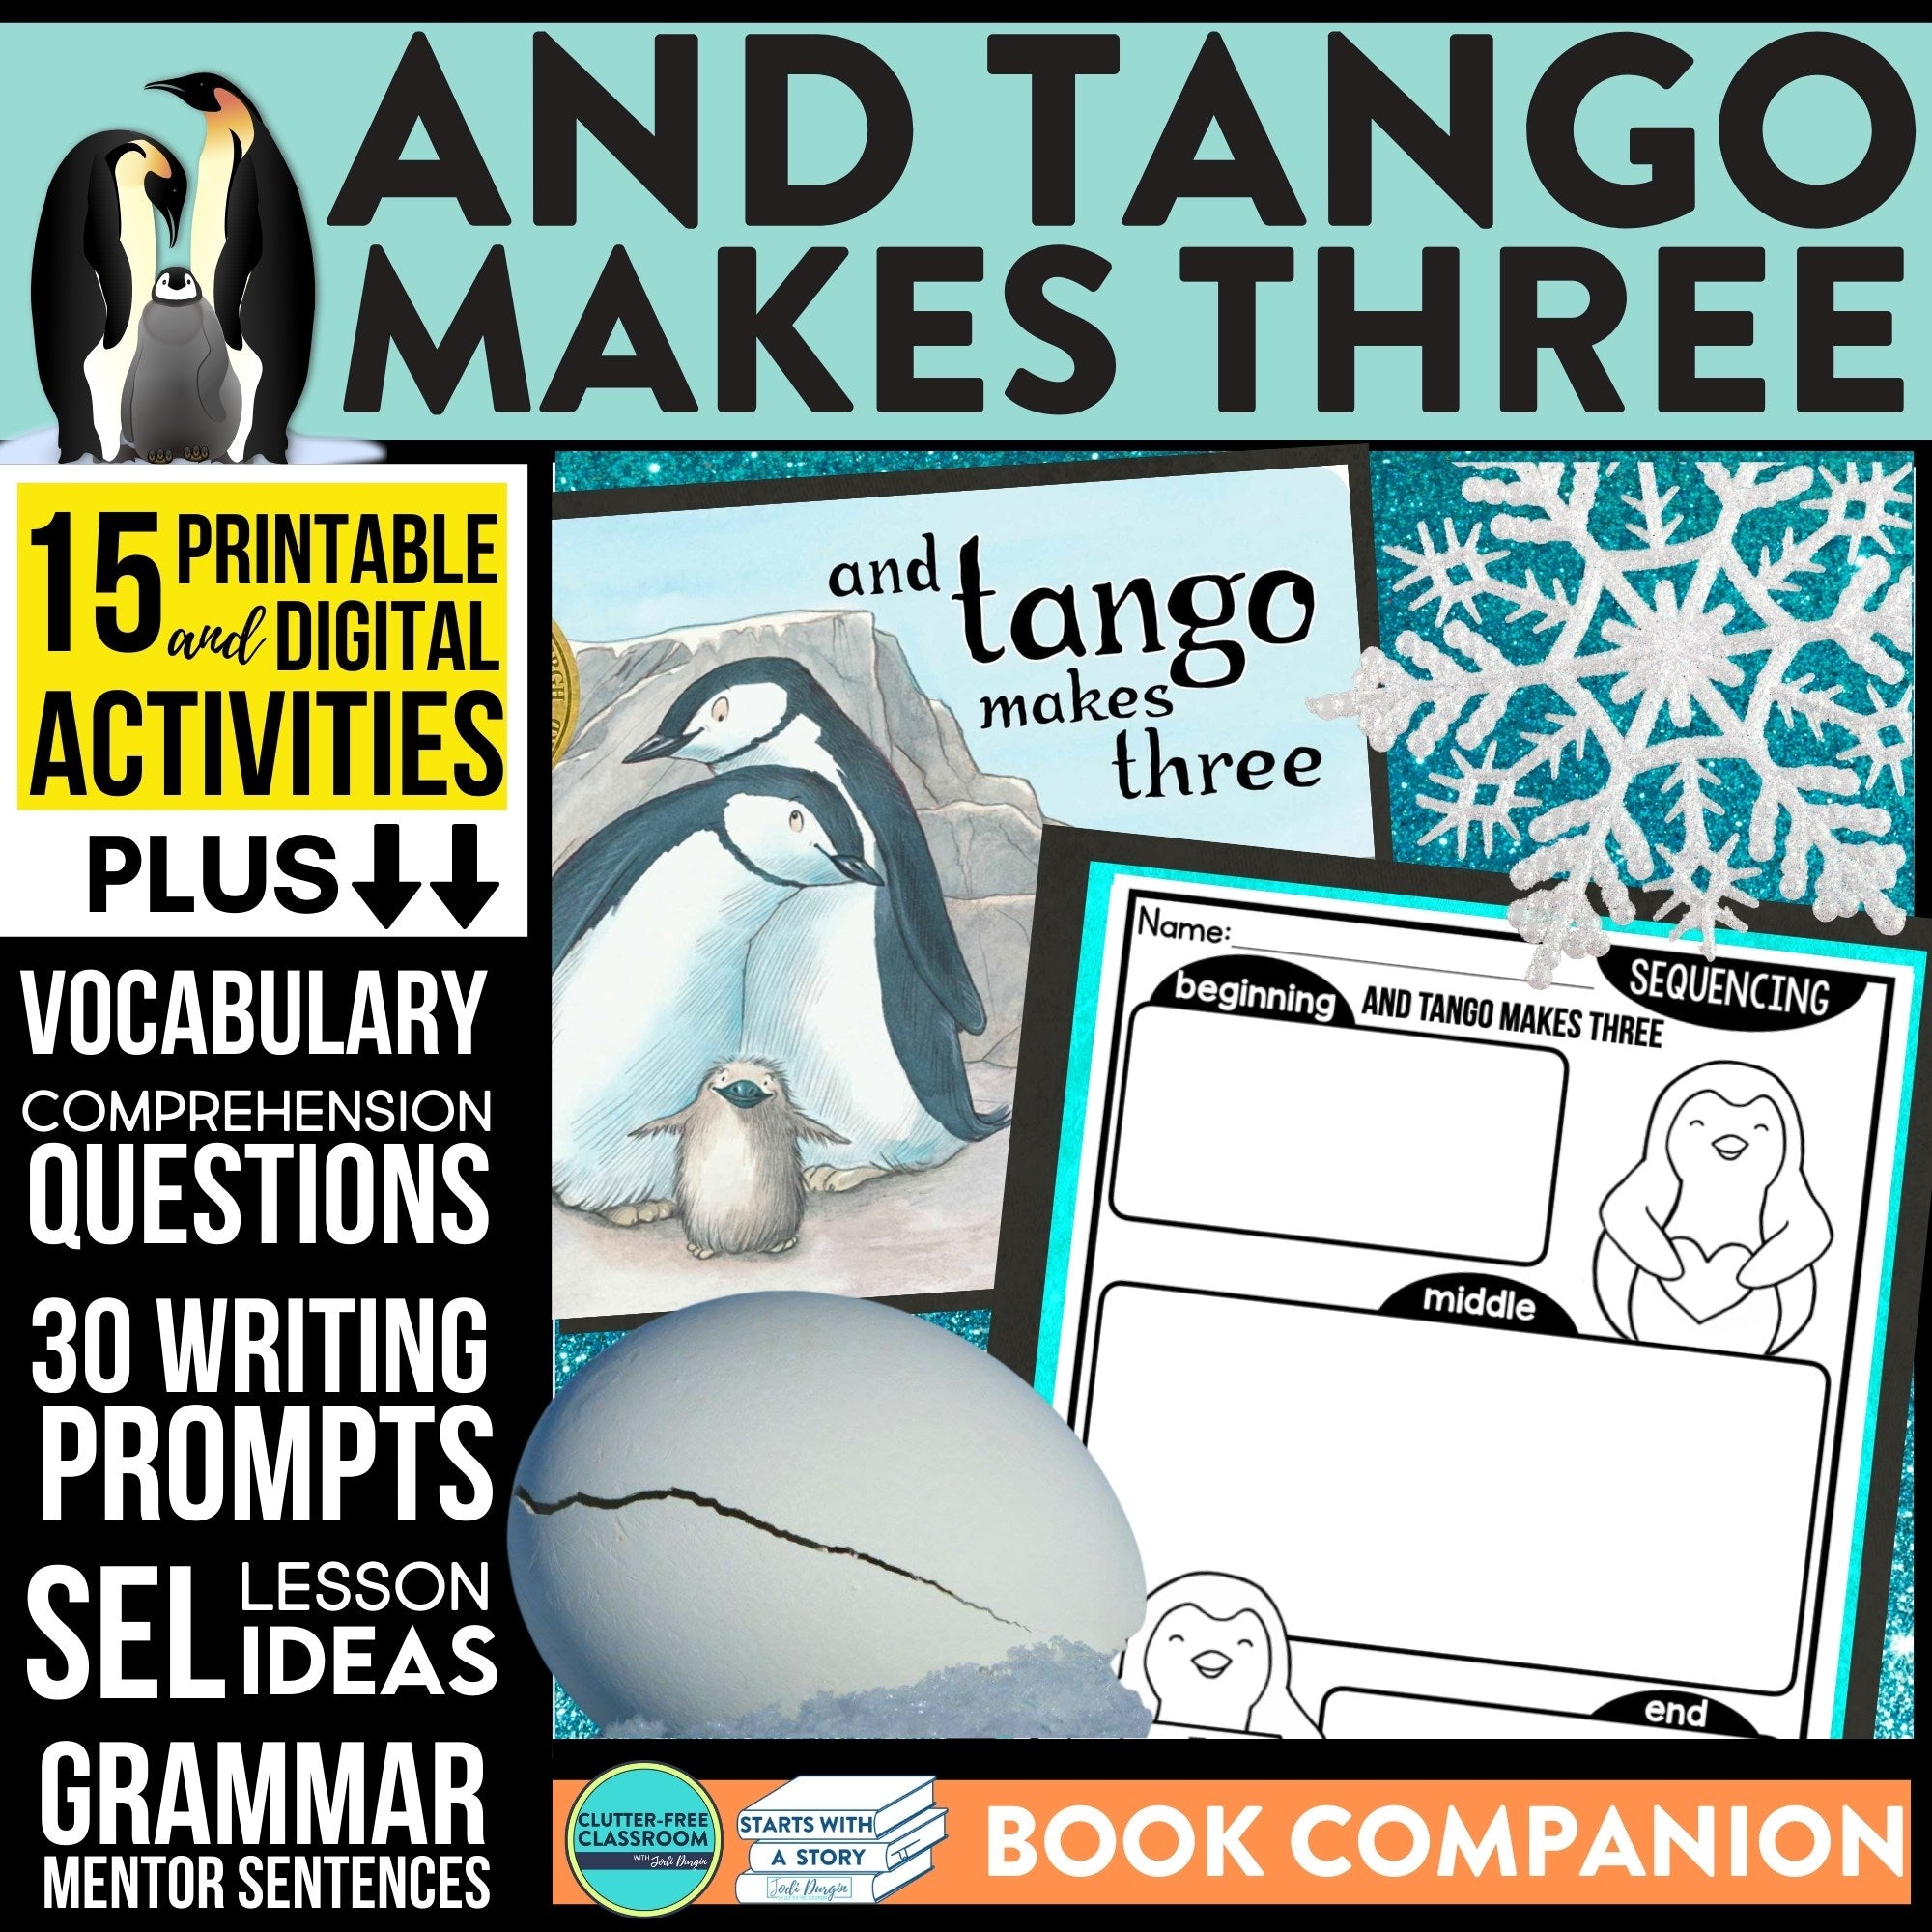 AND TANGO MAKES THREE activities and lesson plan ideas